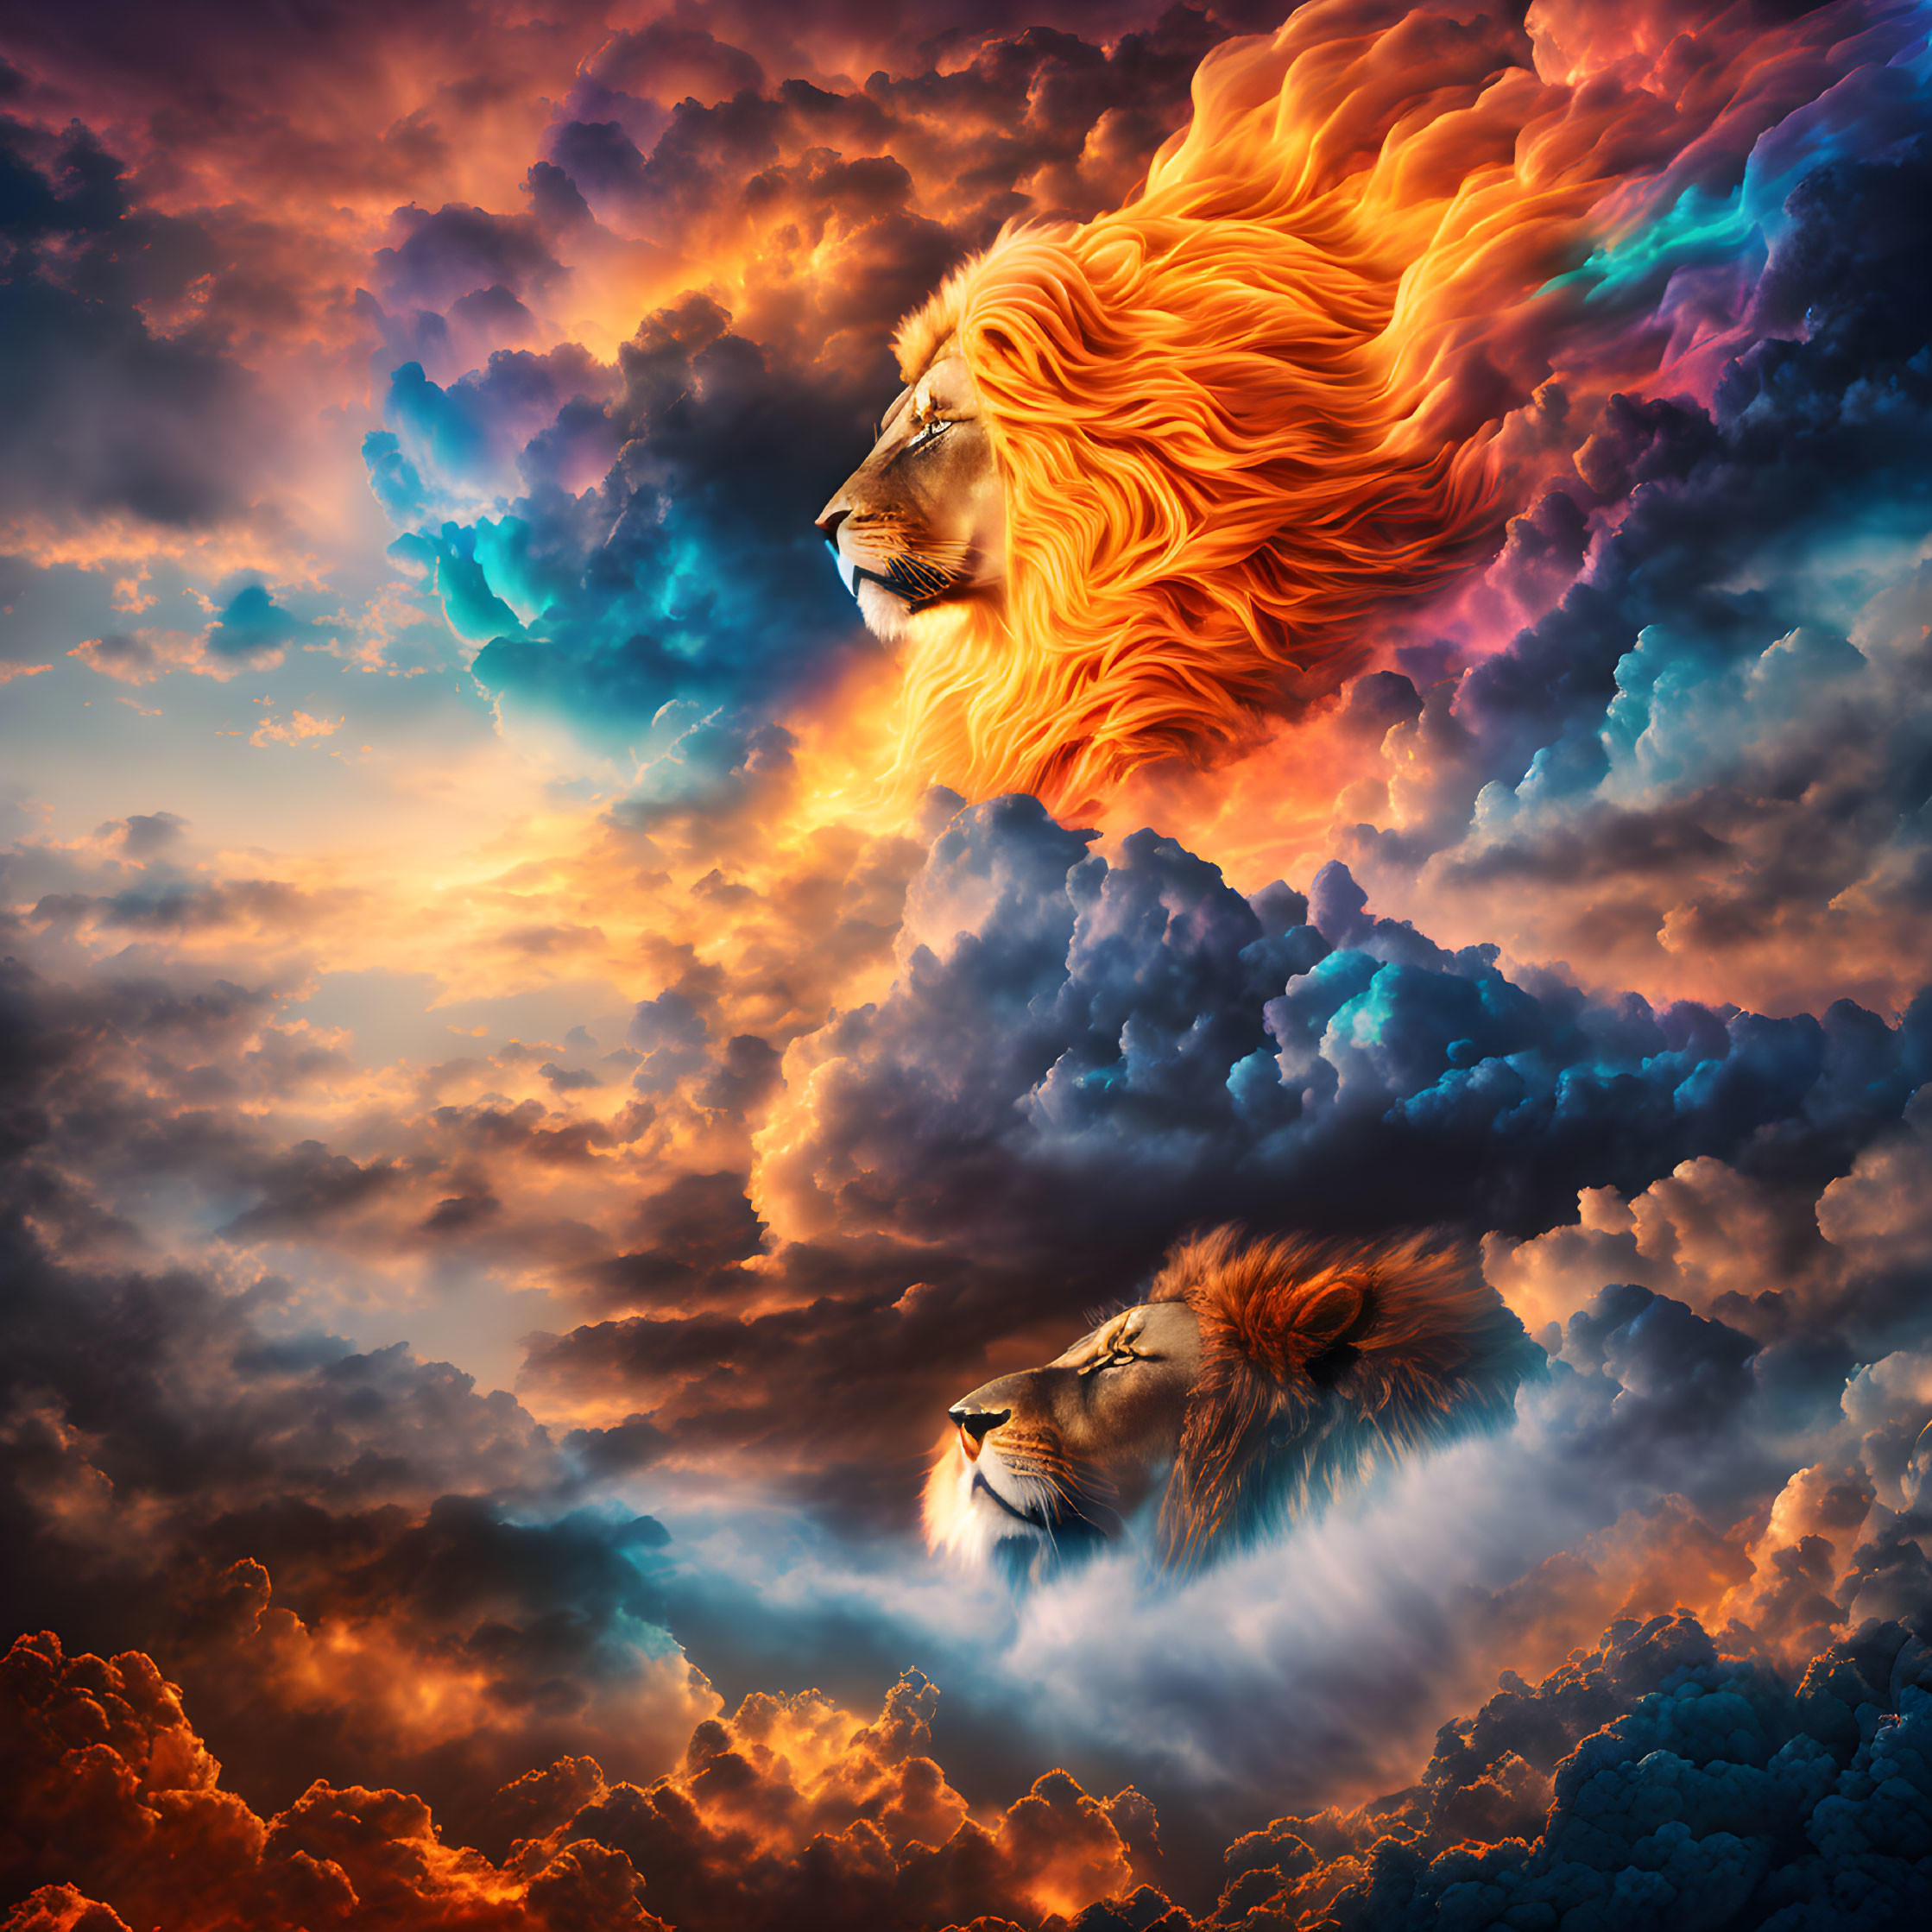 Dual Lion Cloud Artwork: Fiery Orange and Cool Blue Heads in Dramatic Sky